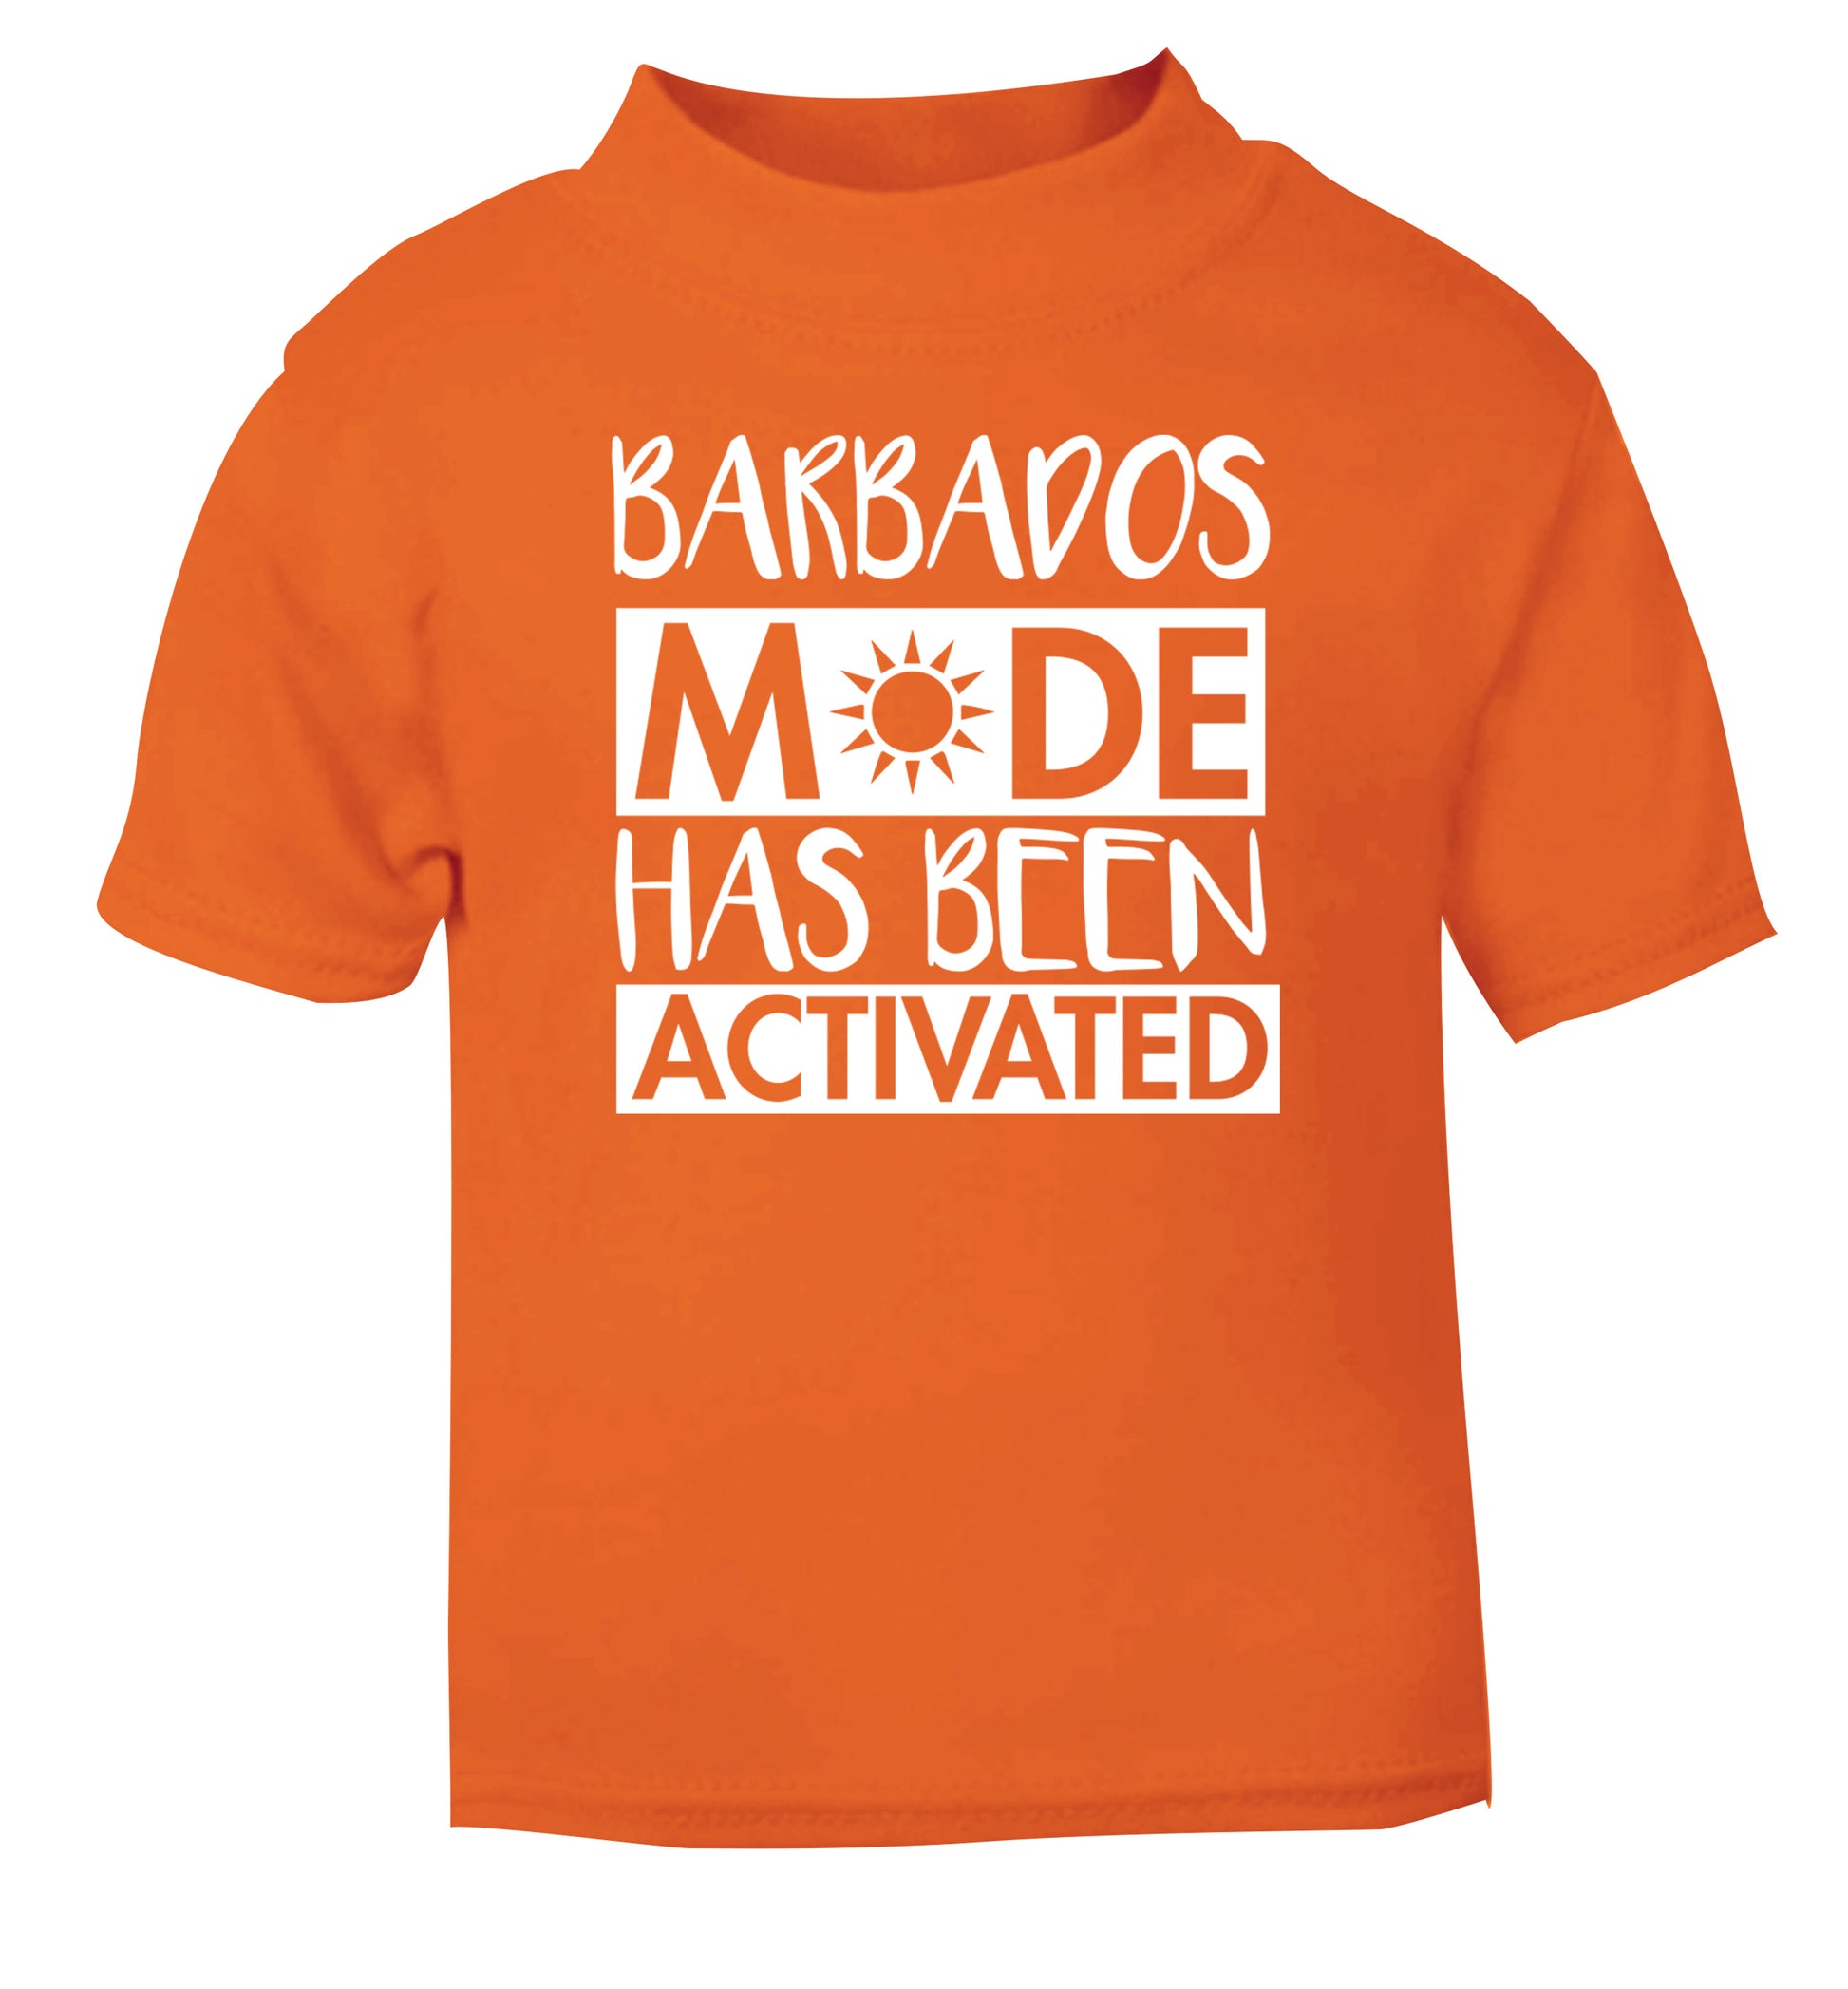 Barbados mode has been activated orange Baby Toddler Tshirt 2 Years